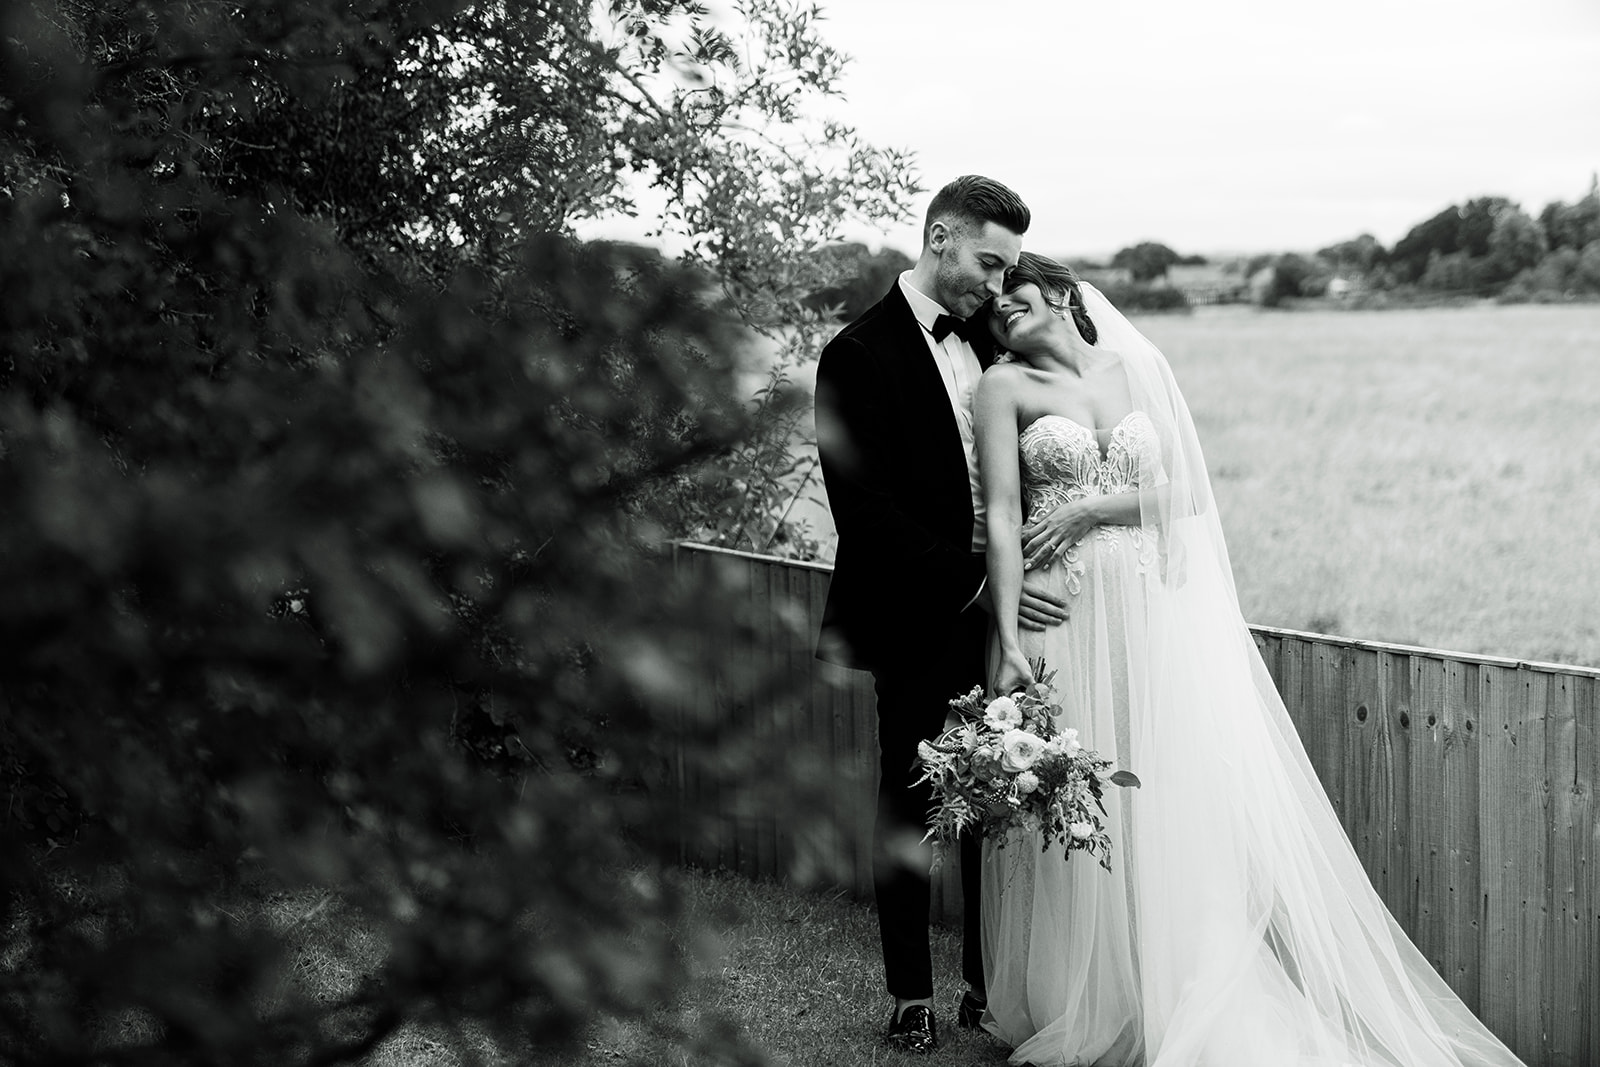 Izzy and Alex's Story | Wedding Photography by Your Story Studios